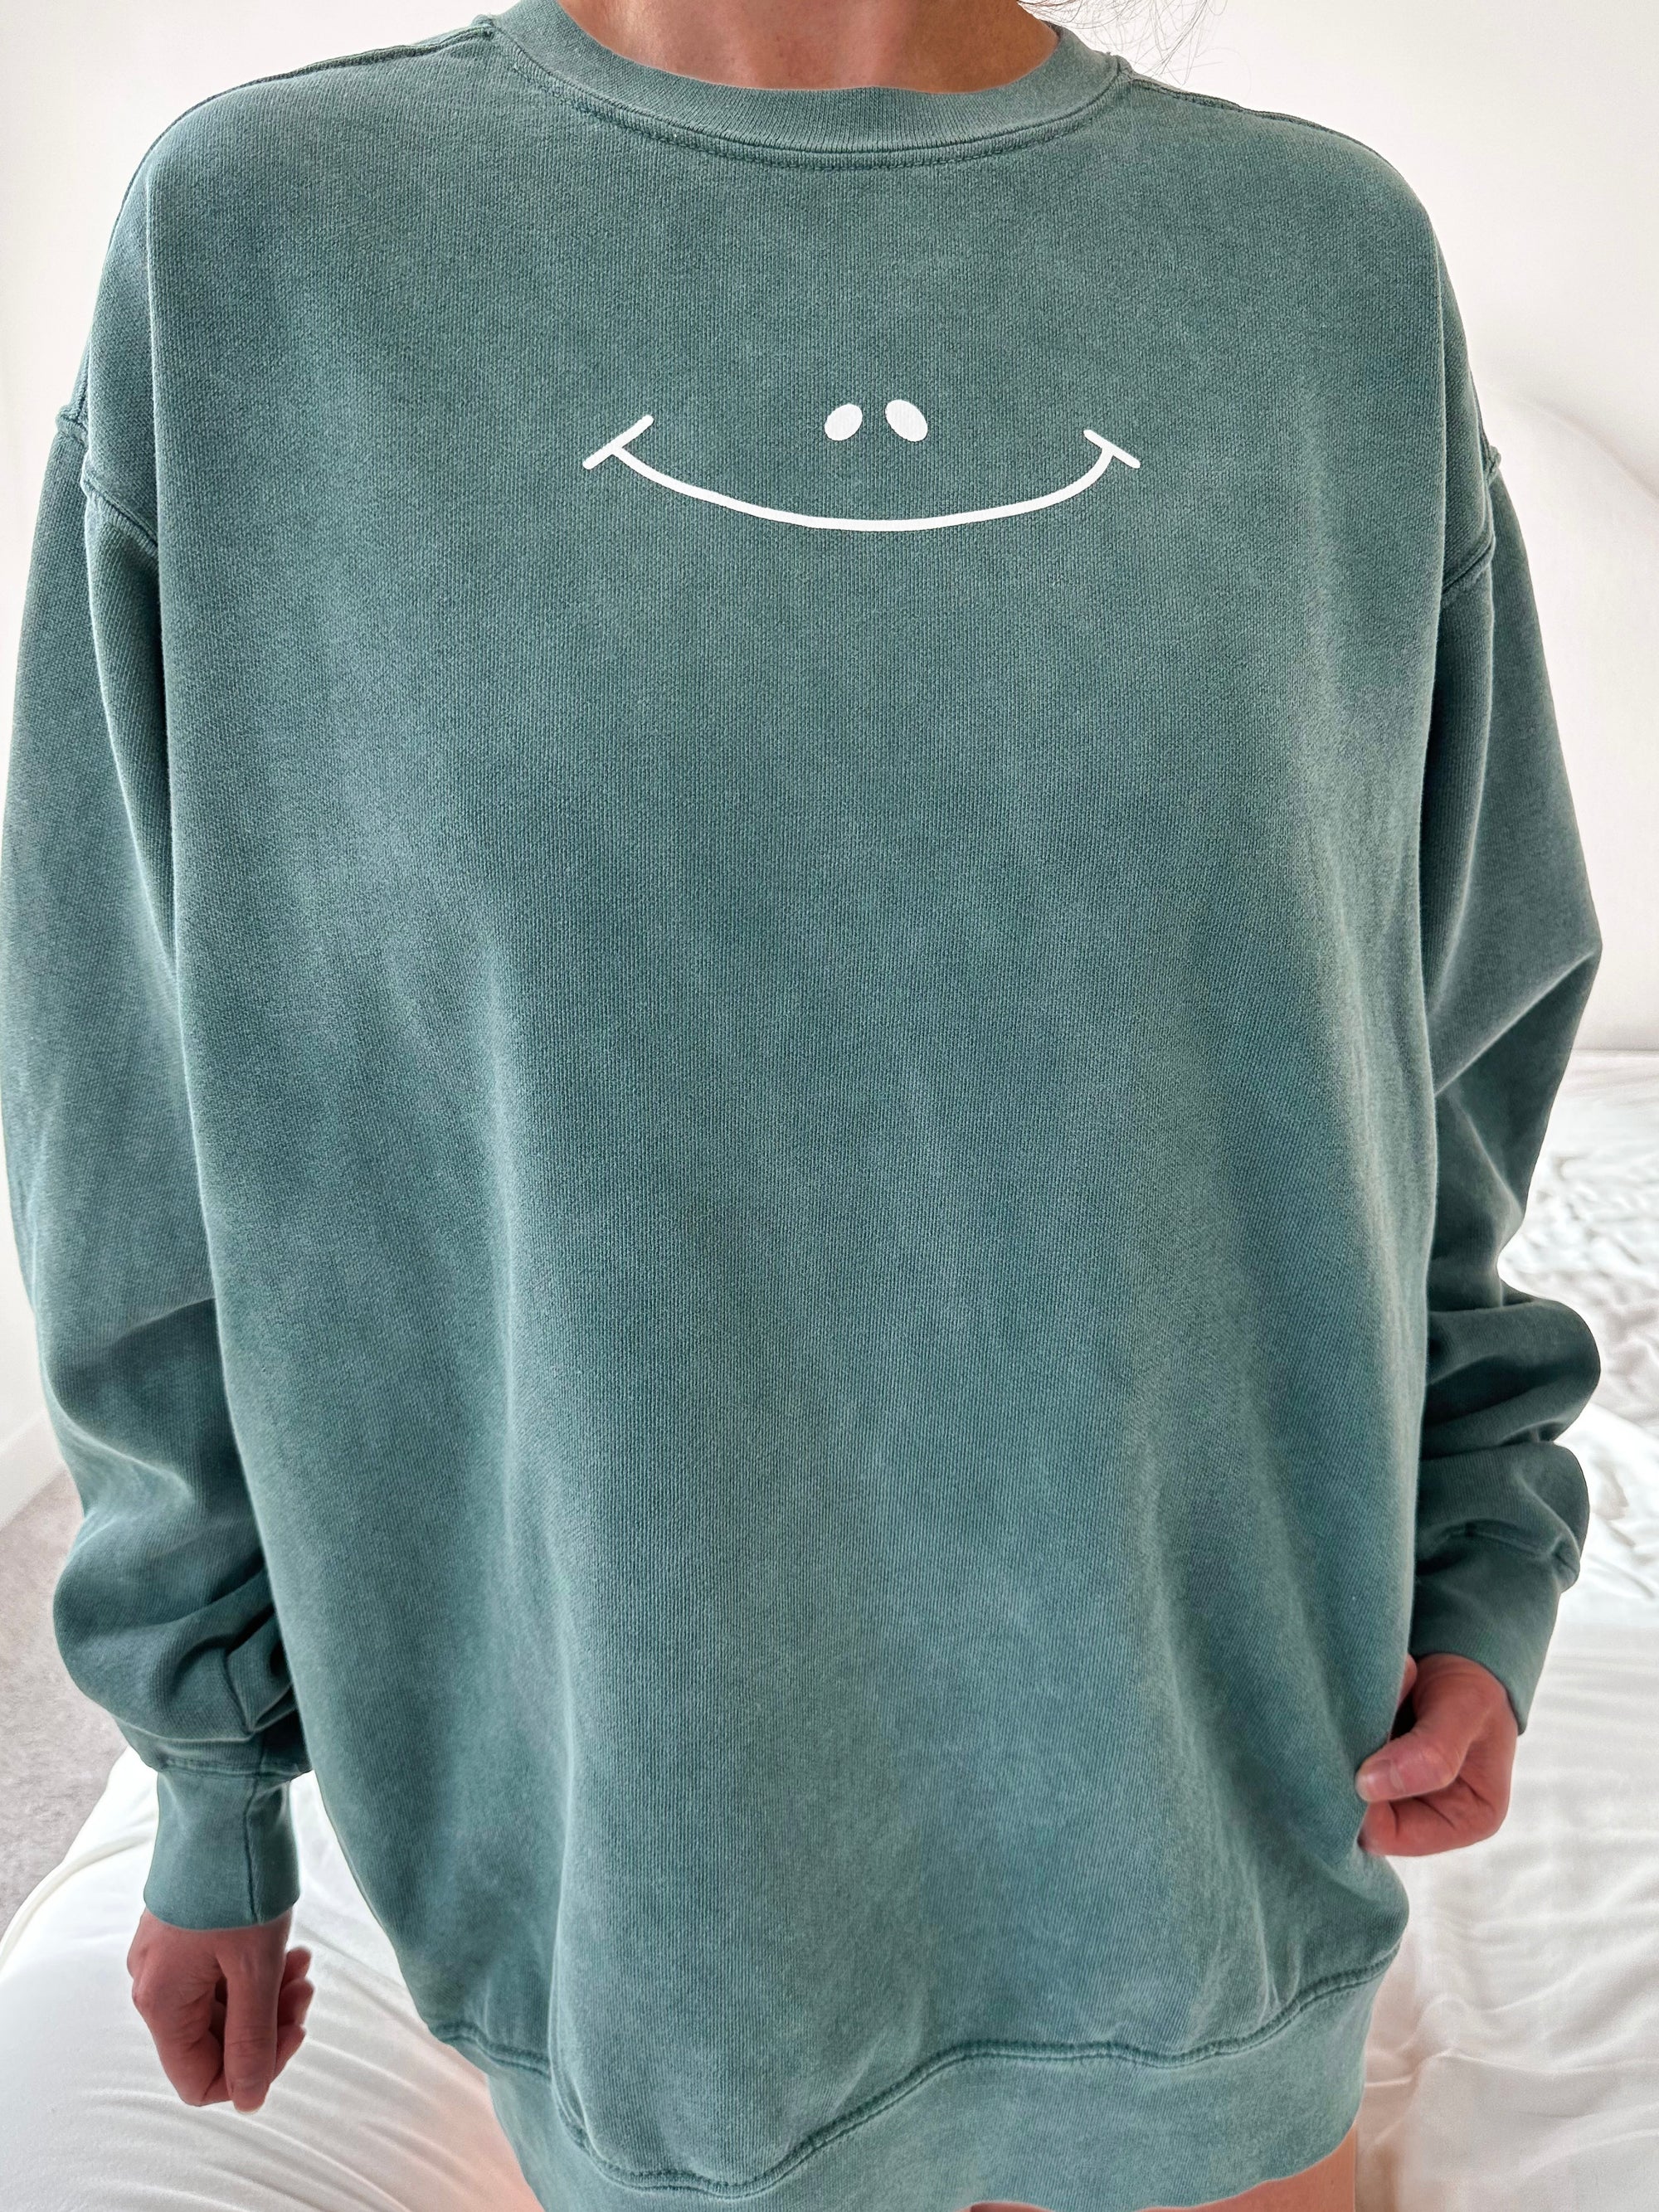 It's Going To Be Okay Smiley Face Sweatshirt - Sunkissedcoconut